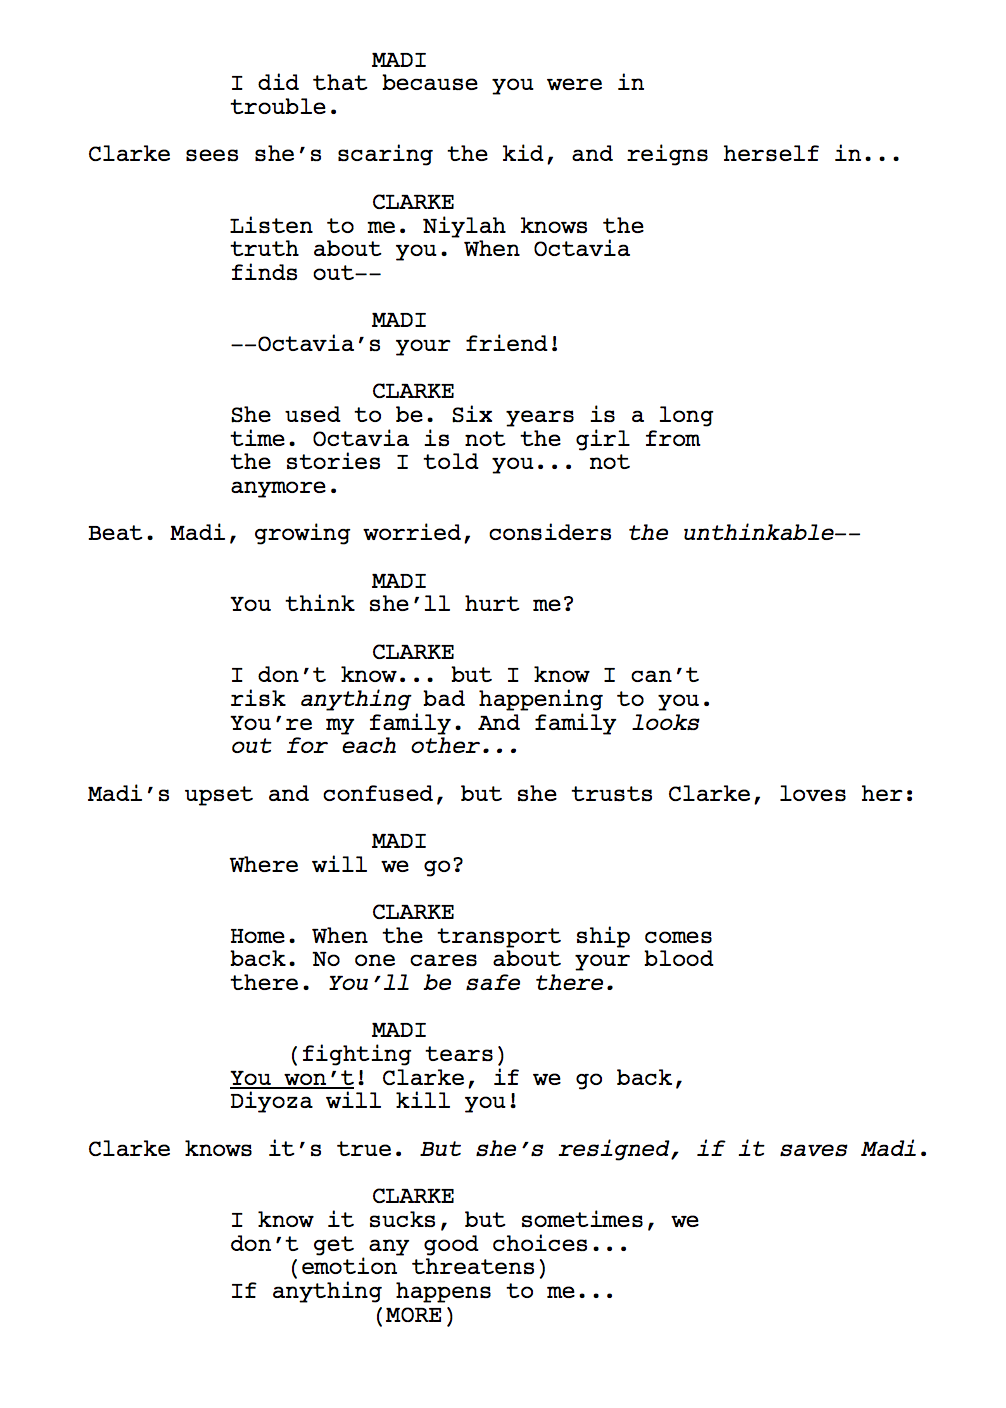 Hey guys!We’re back with another look inside the script, this time with Clarke